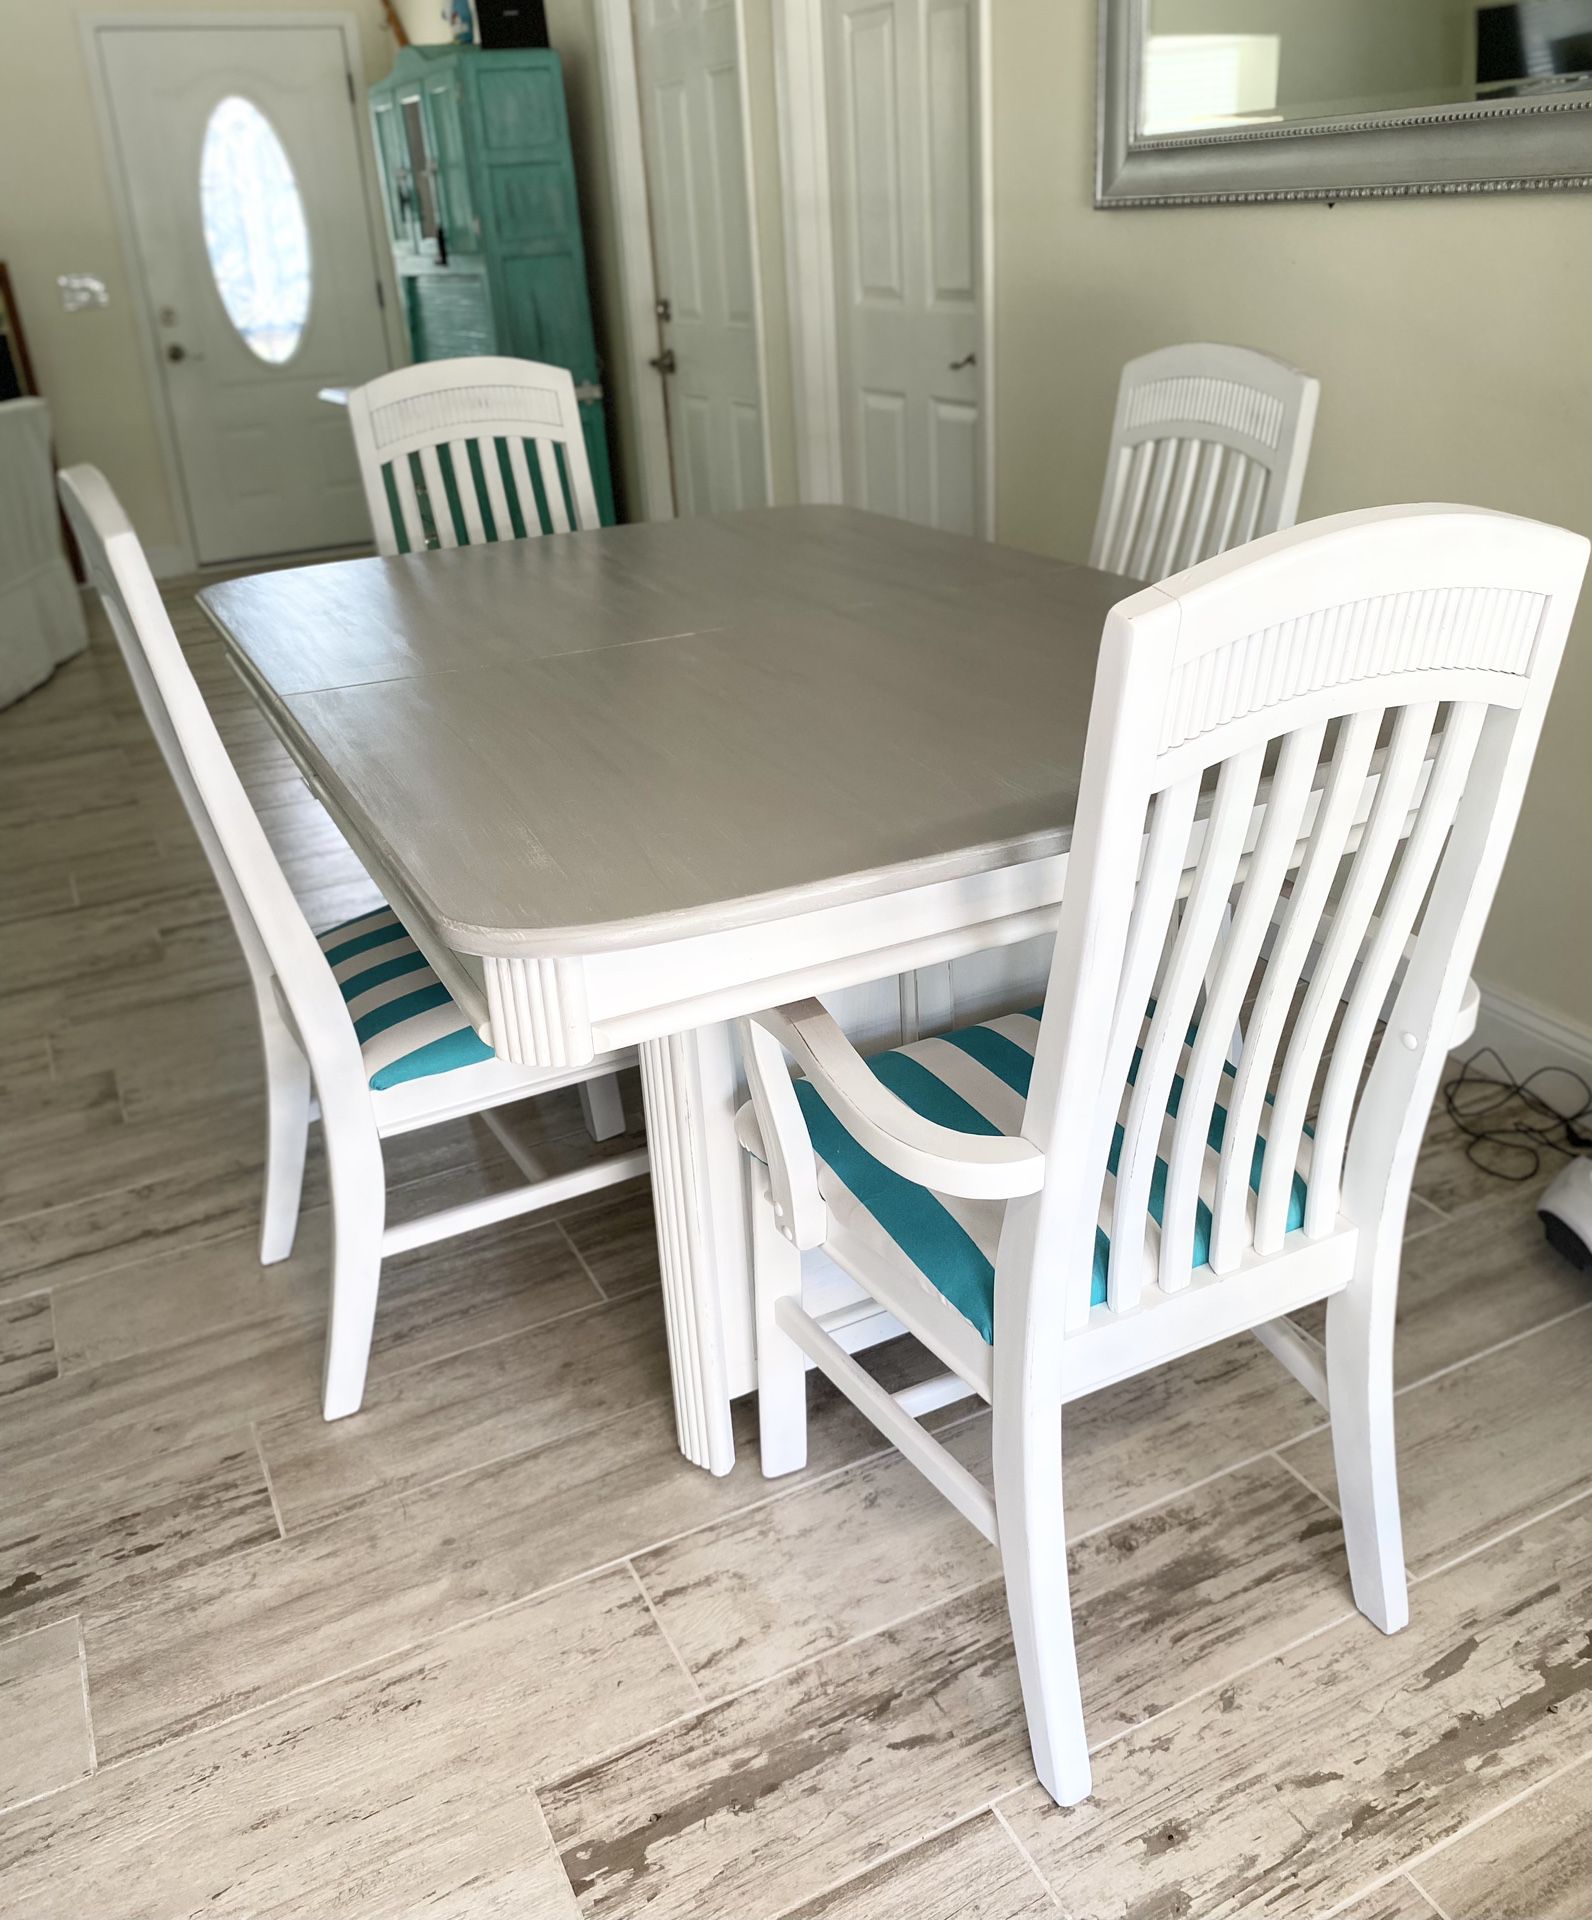 Beach Dining Table And Chairs Grey  42x 62 Distressed Top 